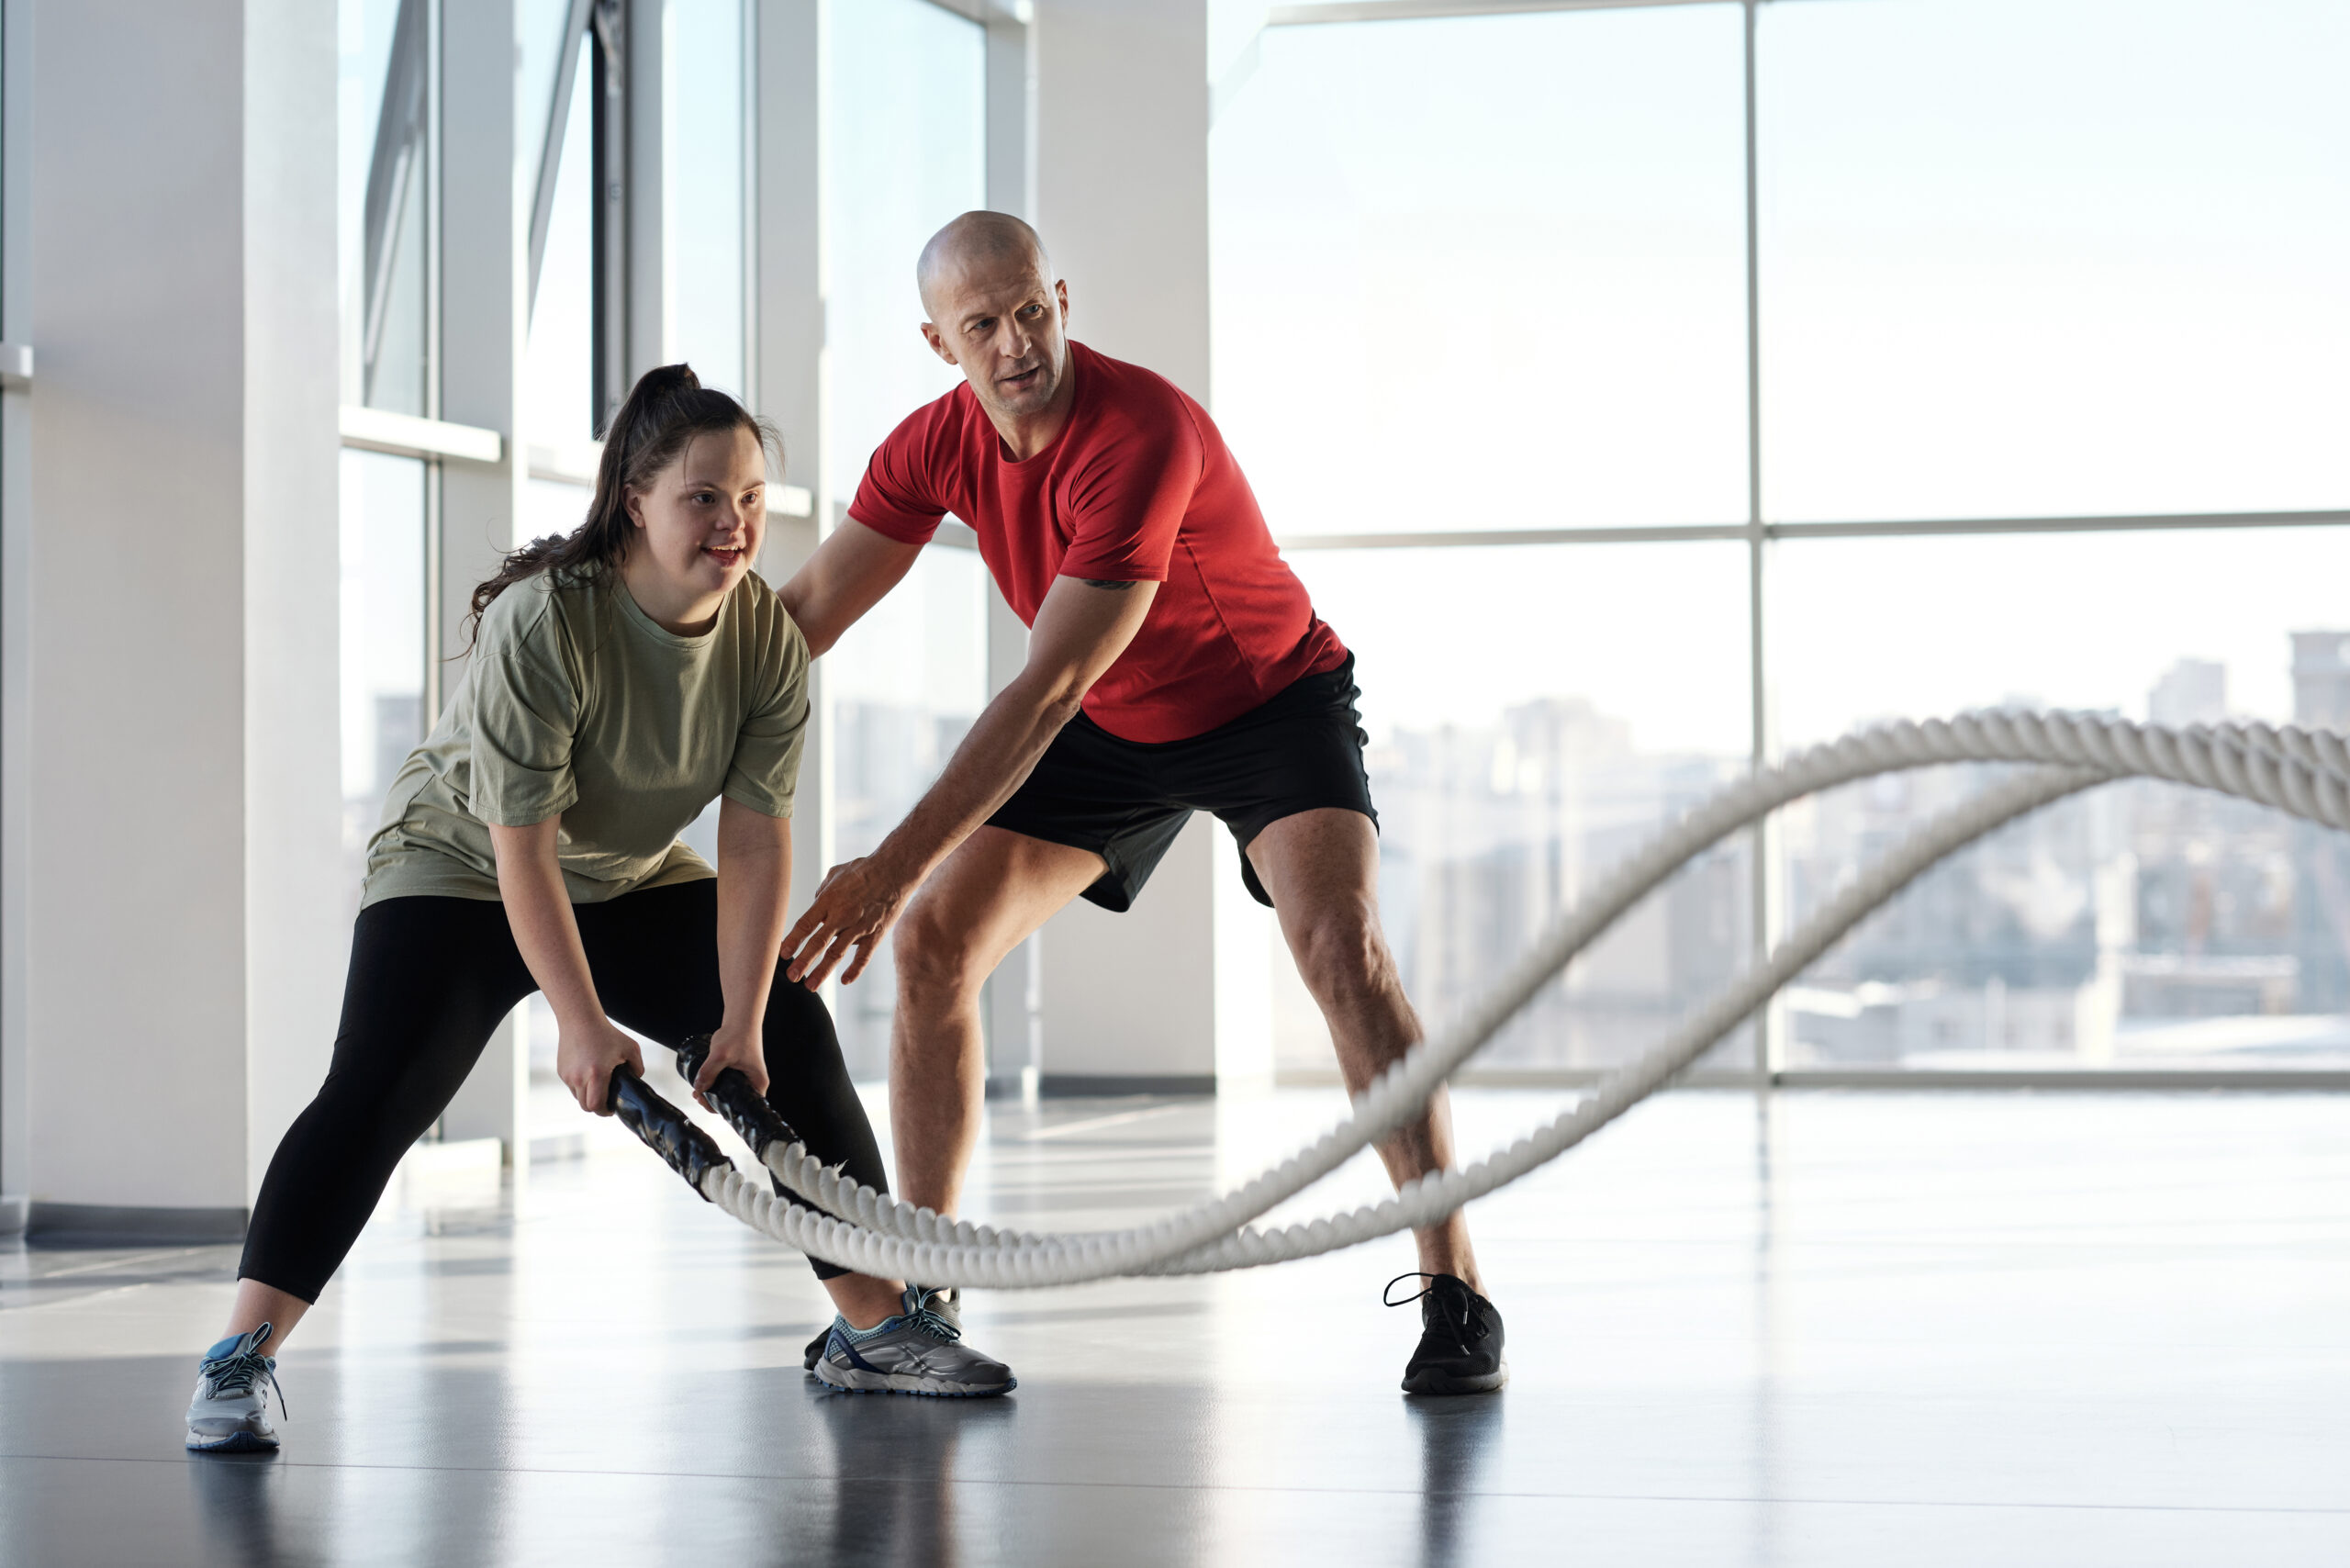 How Can I Develop A Workout Routine For Rehabilitation After An Injury?